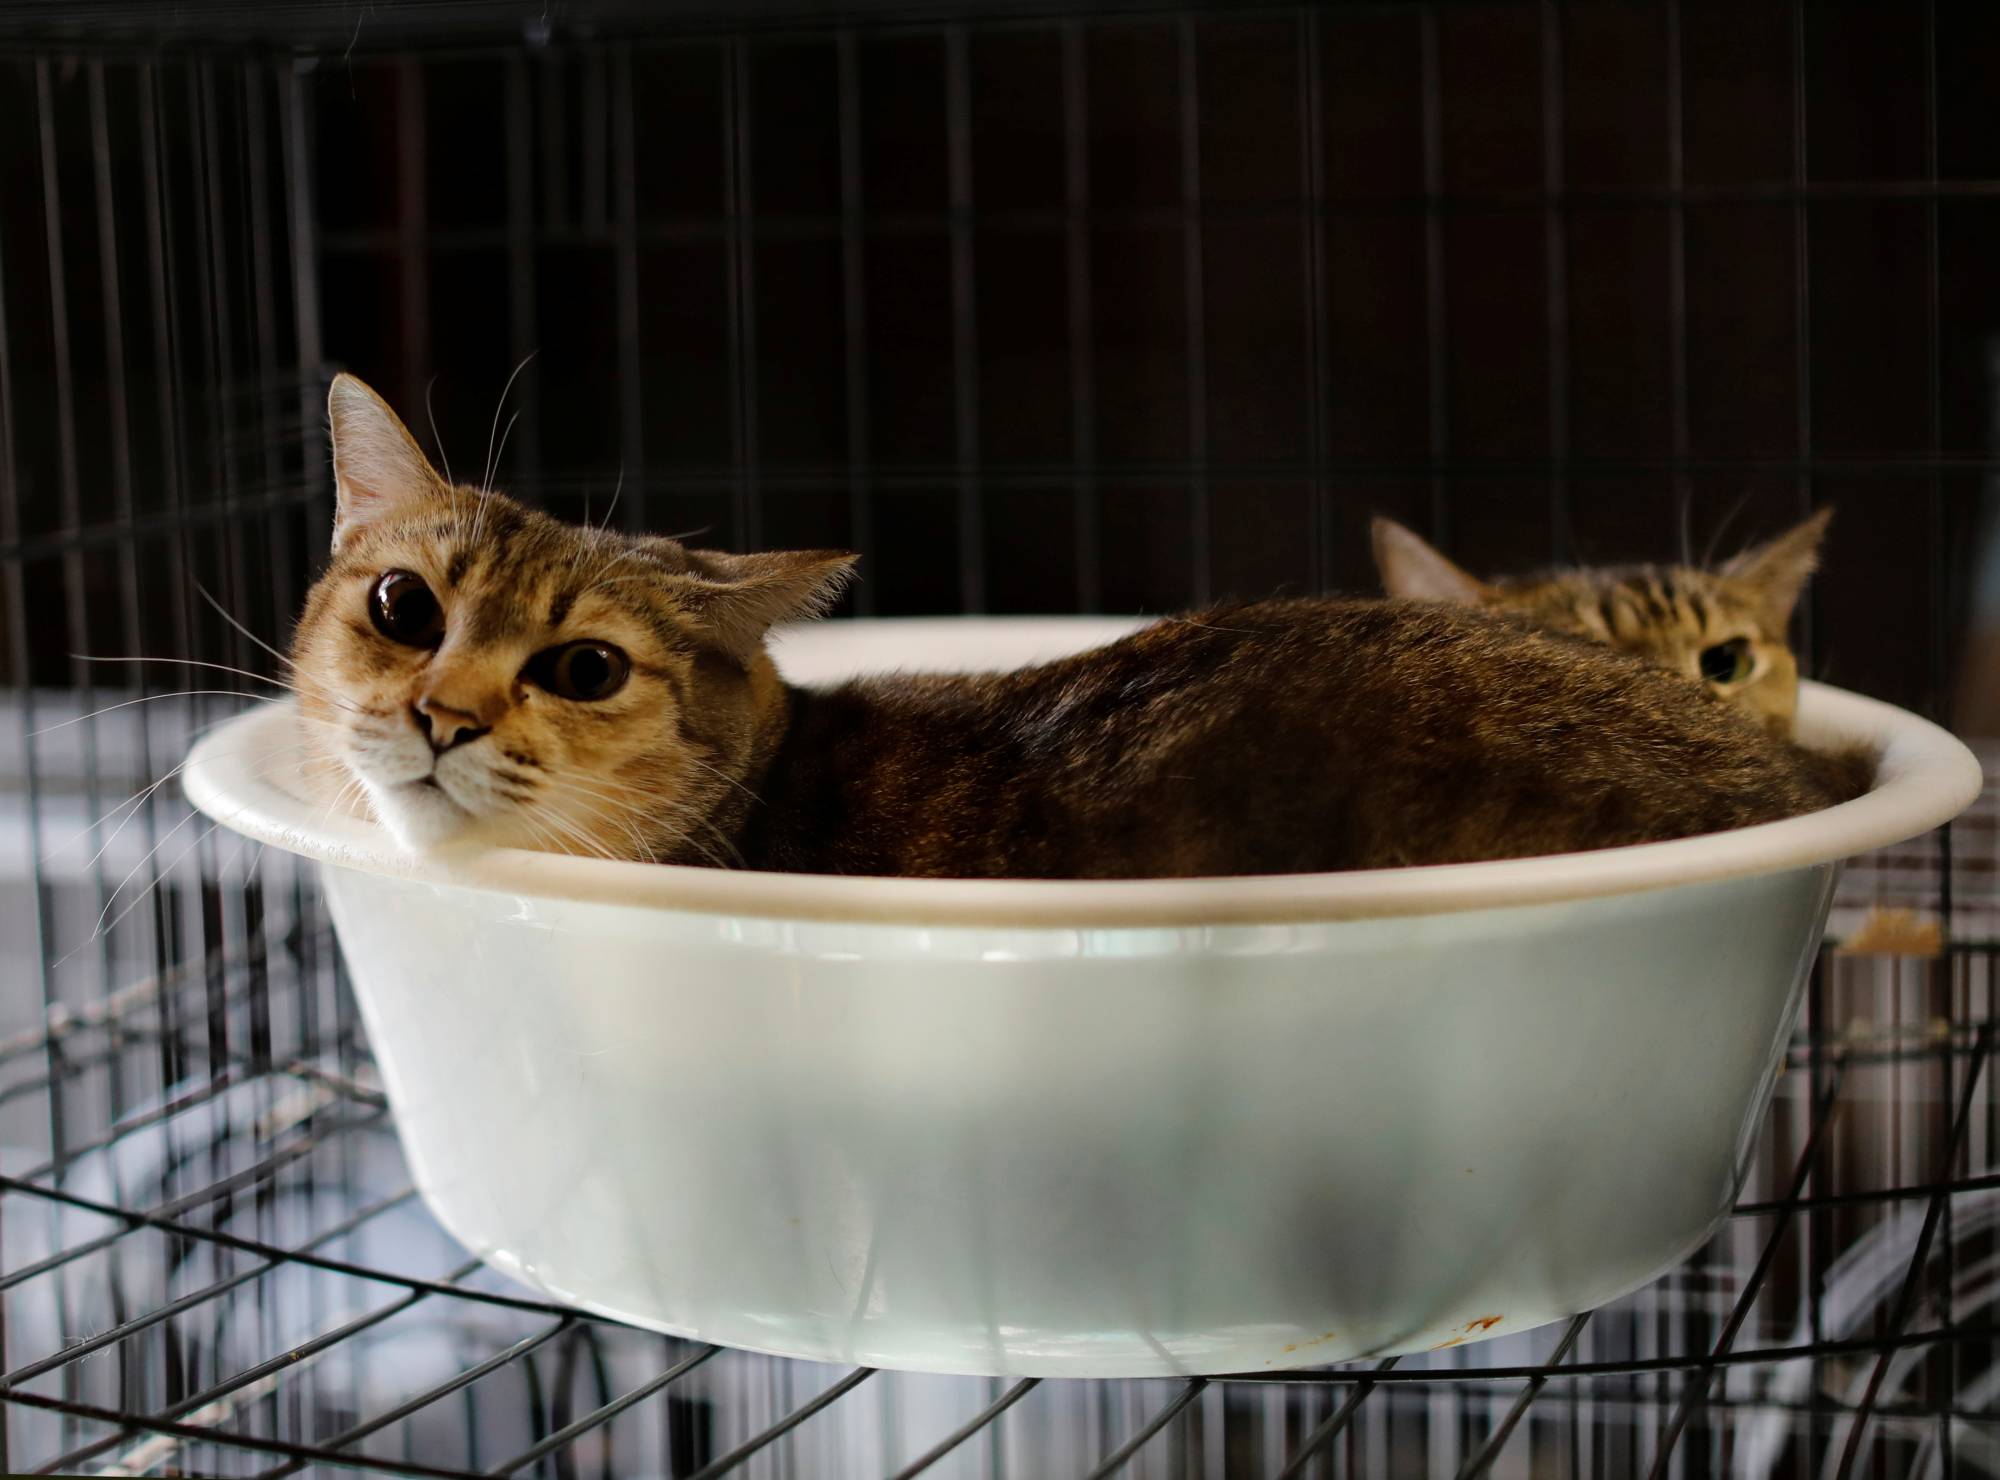 Cats left behind by fleeing neighbors were taken on by Sakae Kato, who now looks after 41 of the animals. | REUTERS